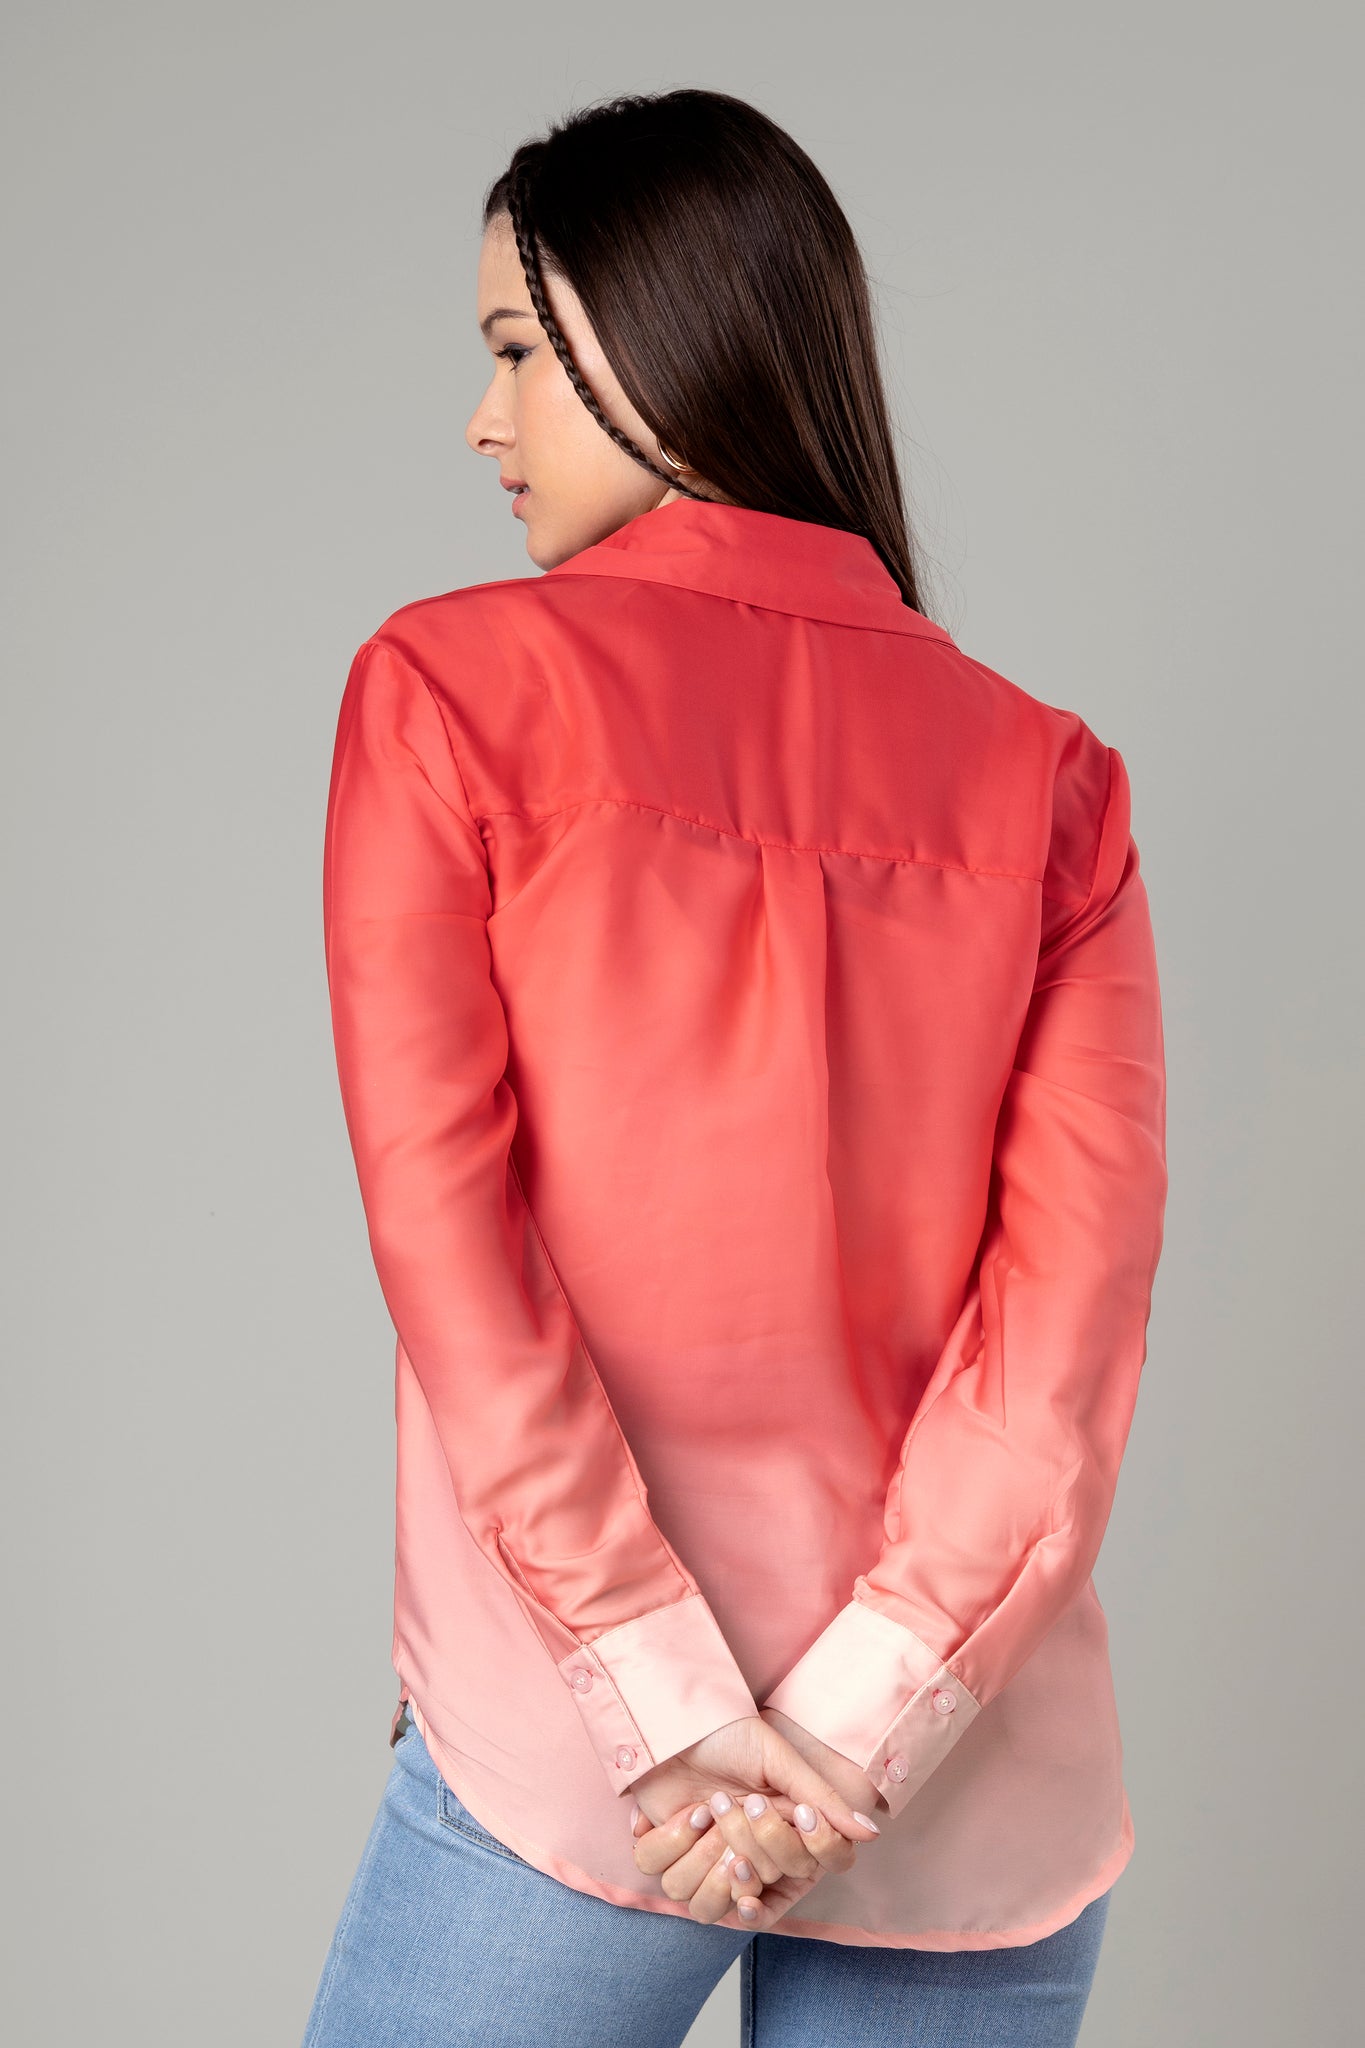 Trendy Red Ombre Shirt For Women